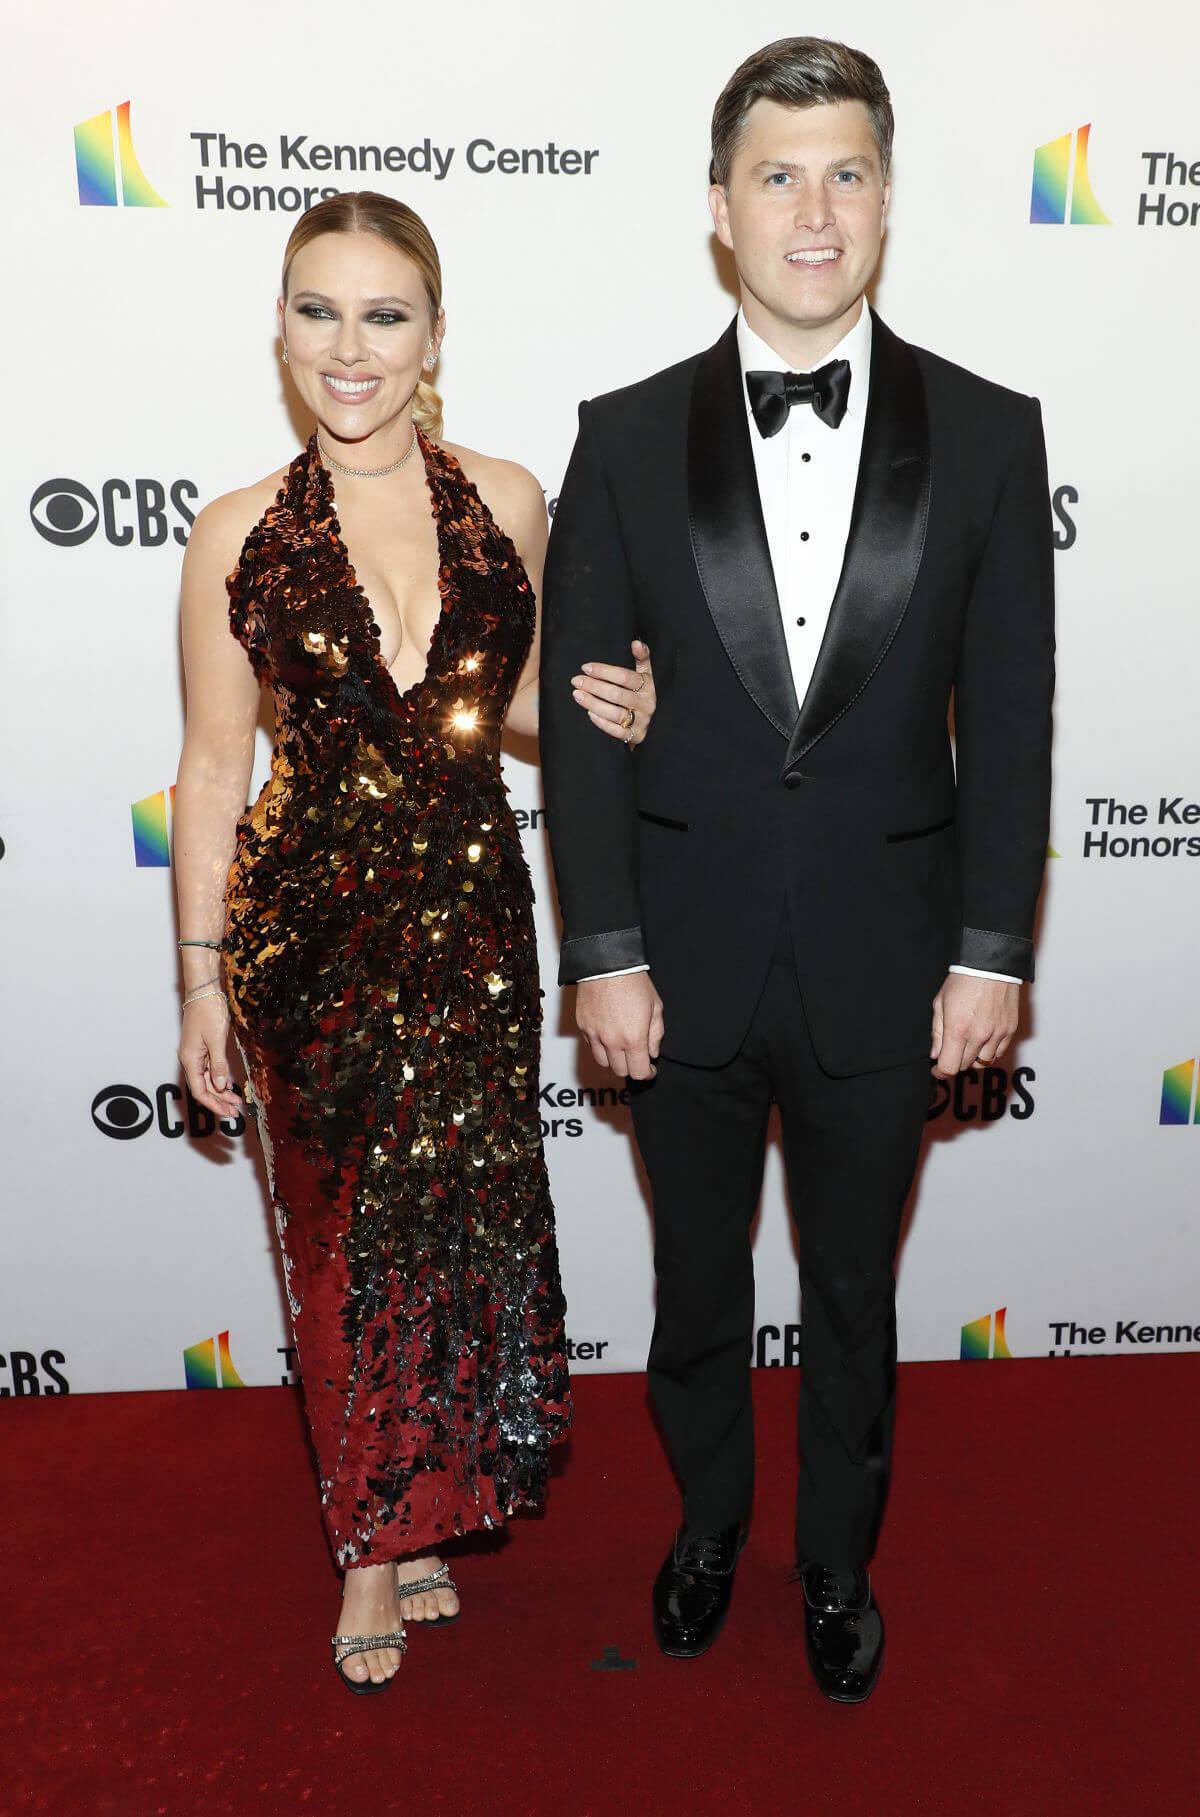 Scarlett Johansson and Colin Jost attends 44th Kennedy Center Honors in Washington